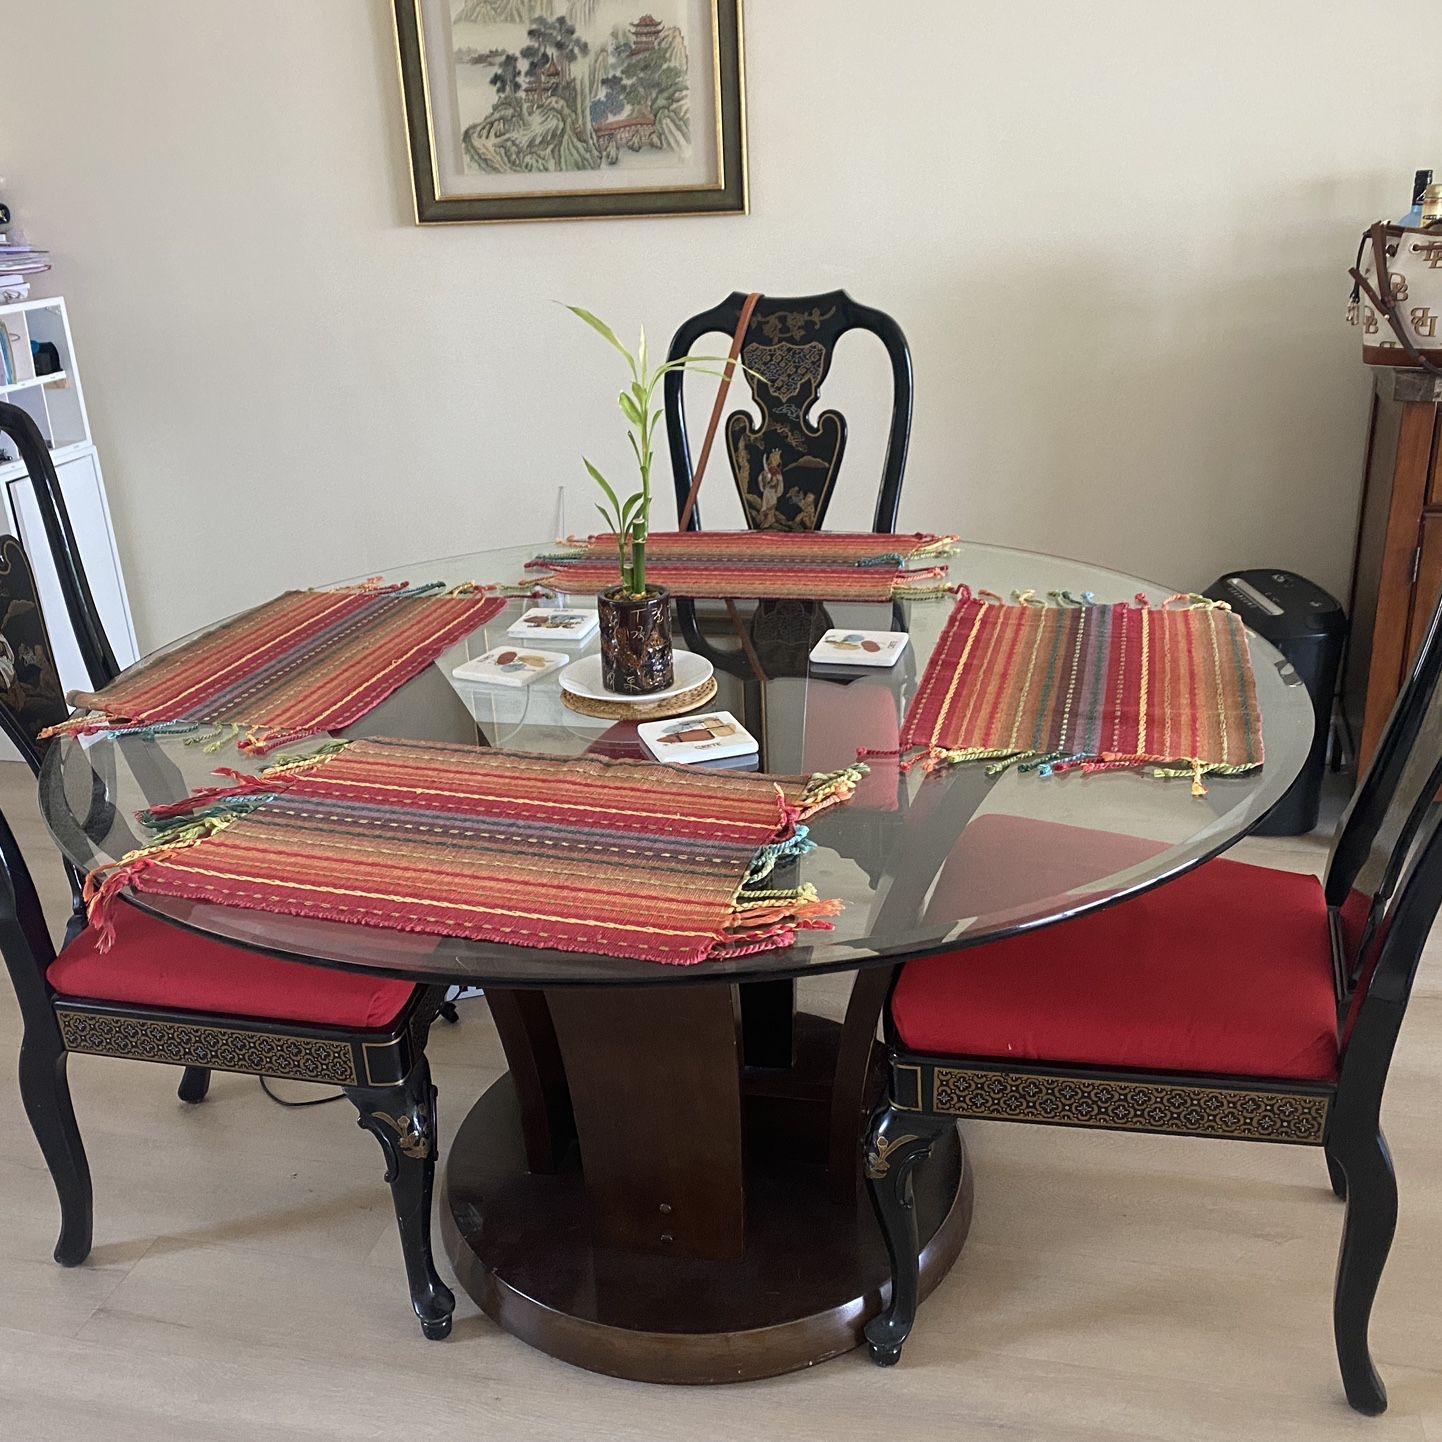 Dinnet set with 4 chairs